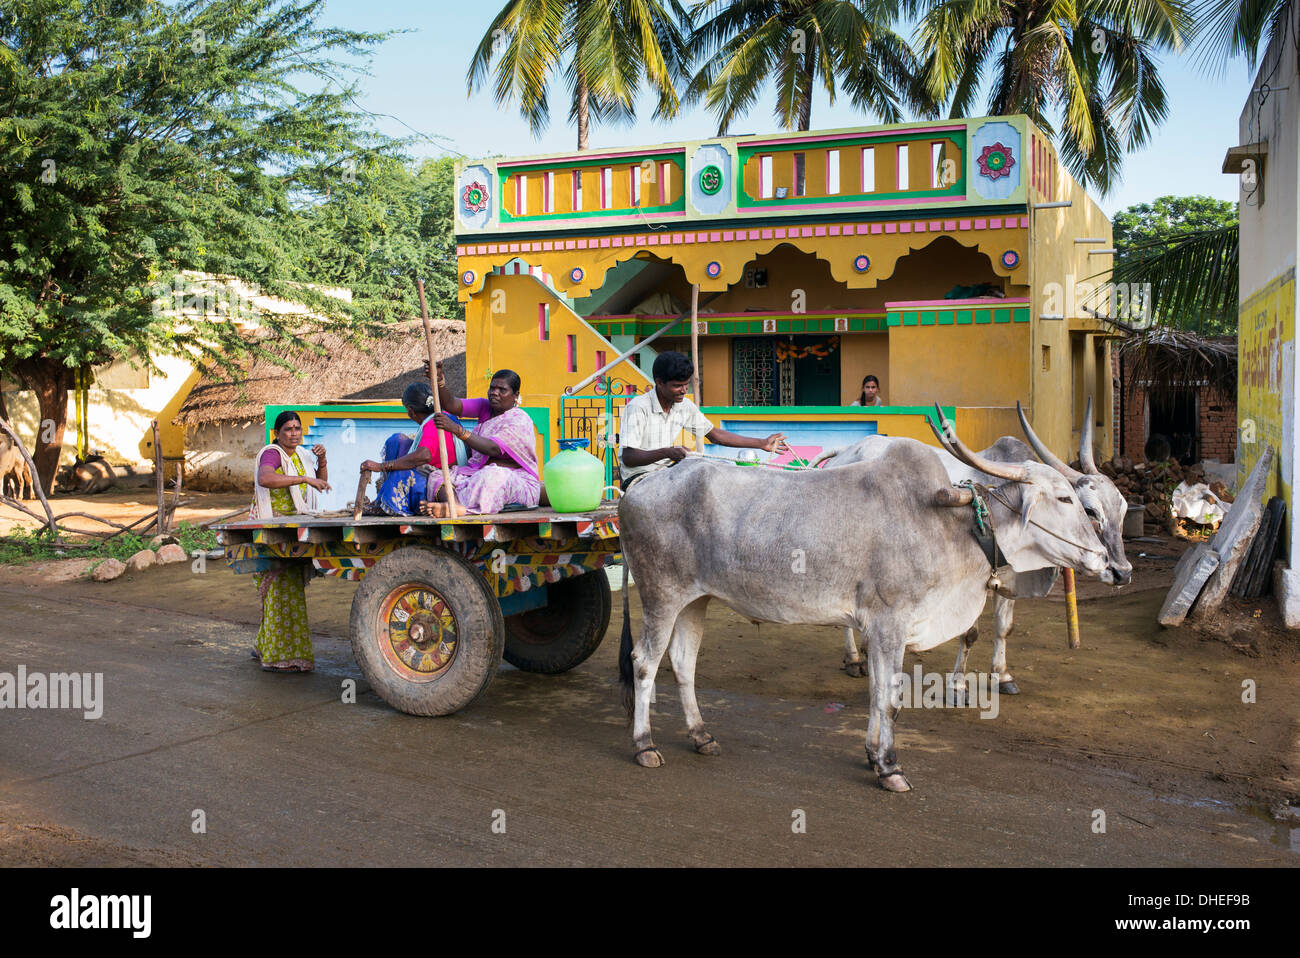 South Indian people on a bullock cart outside a rural indian village house. Andhra Pradesh, India Stock Photo